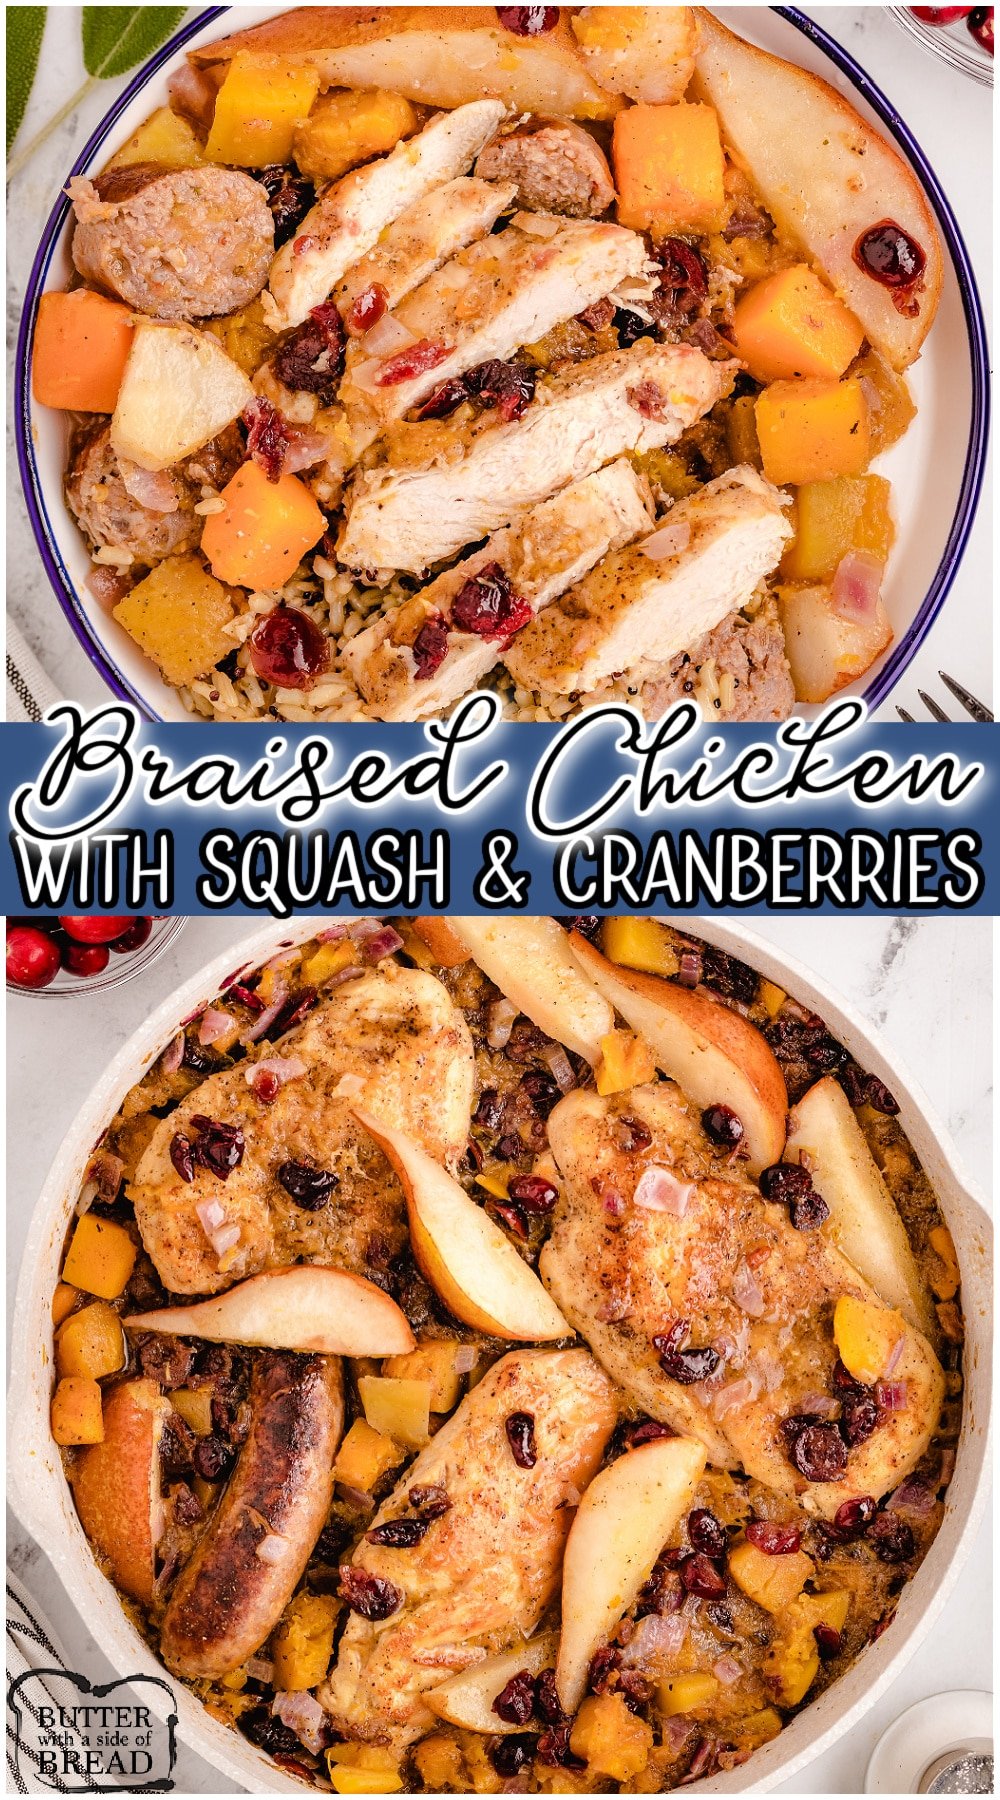 Braised chicken with squash and cranberries is a fantastic fall meal bursting with great flavors! Butternut squash, cranberries, chicken, apple & onions combine for a lovely skillet dinner.